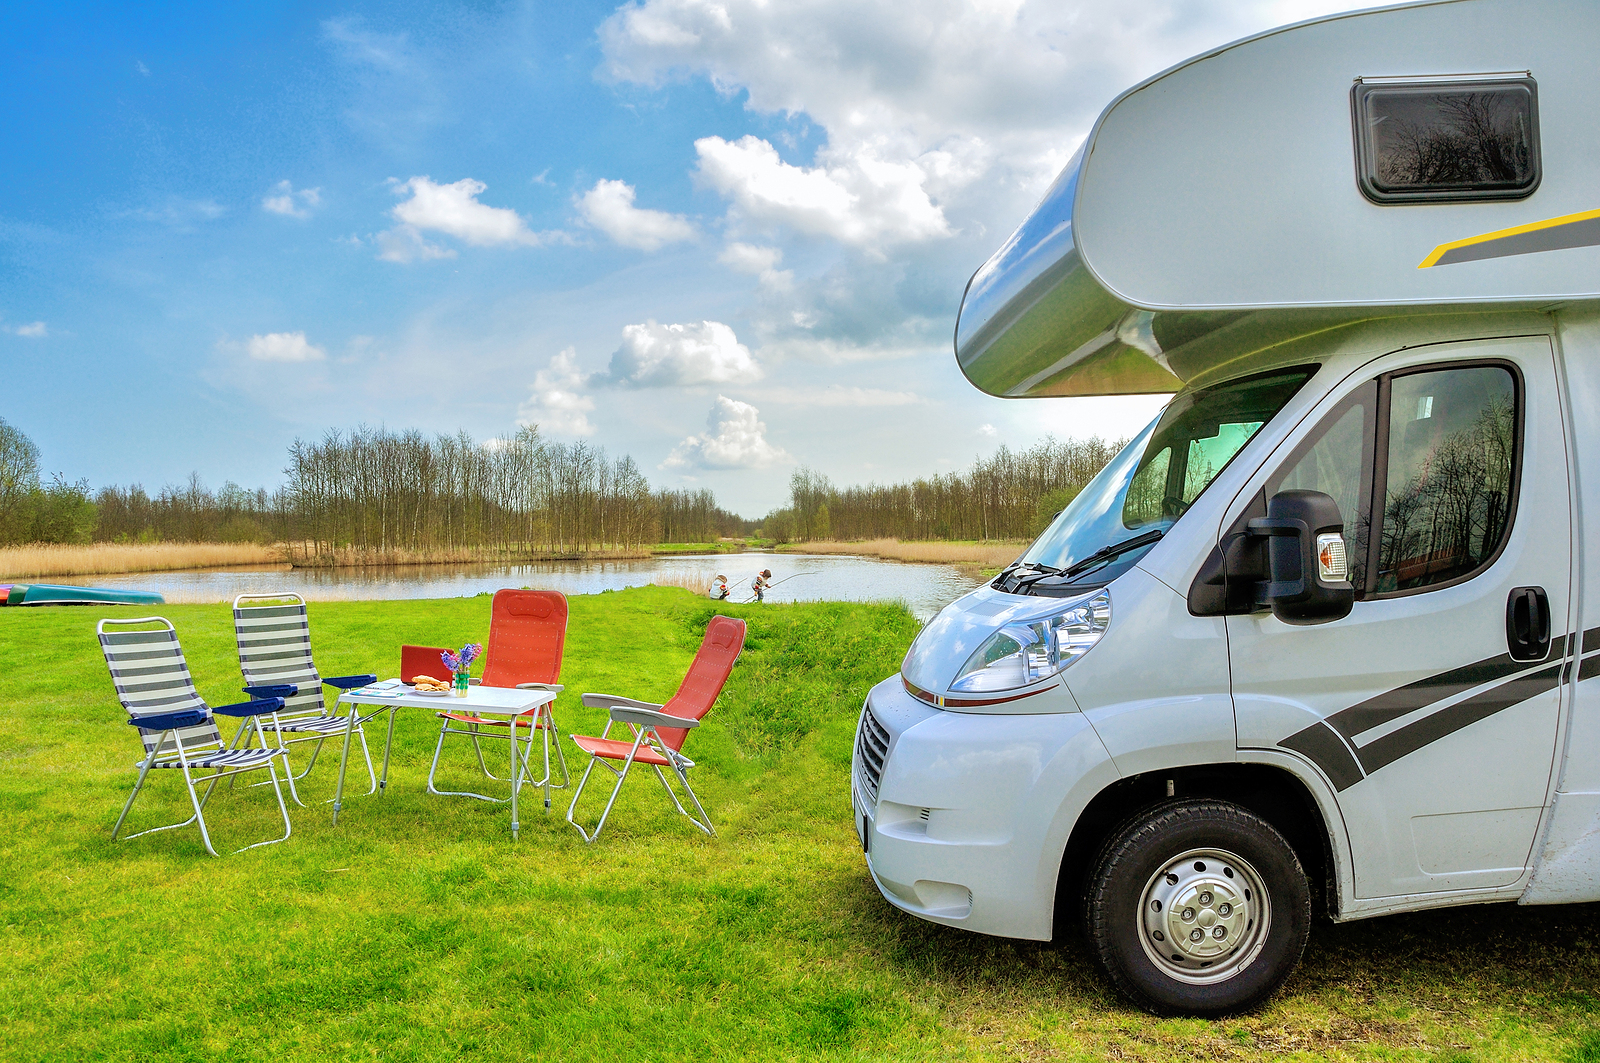 RV (camper) in camping, family vacation travel, holiday trip in motorhome